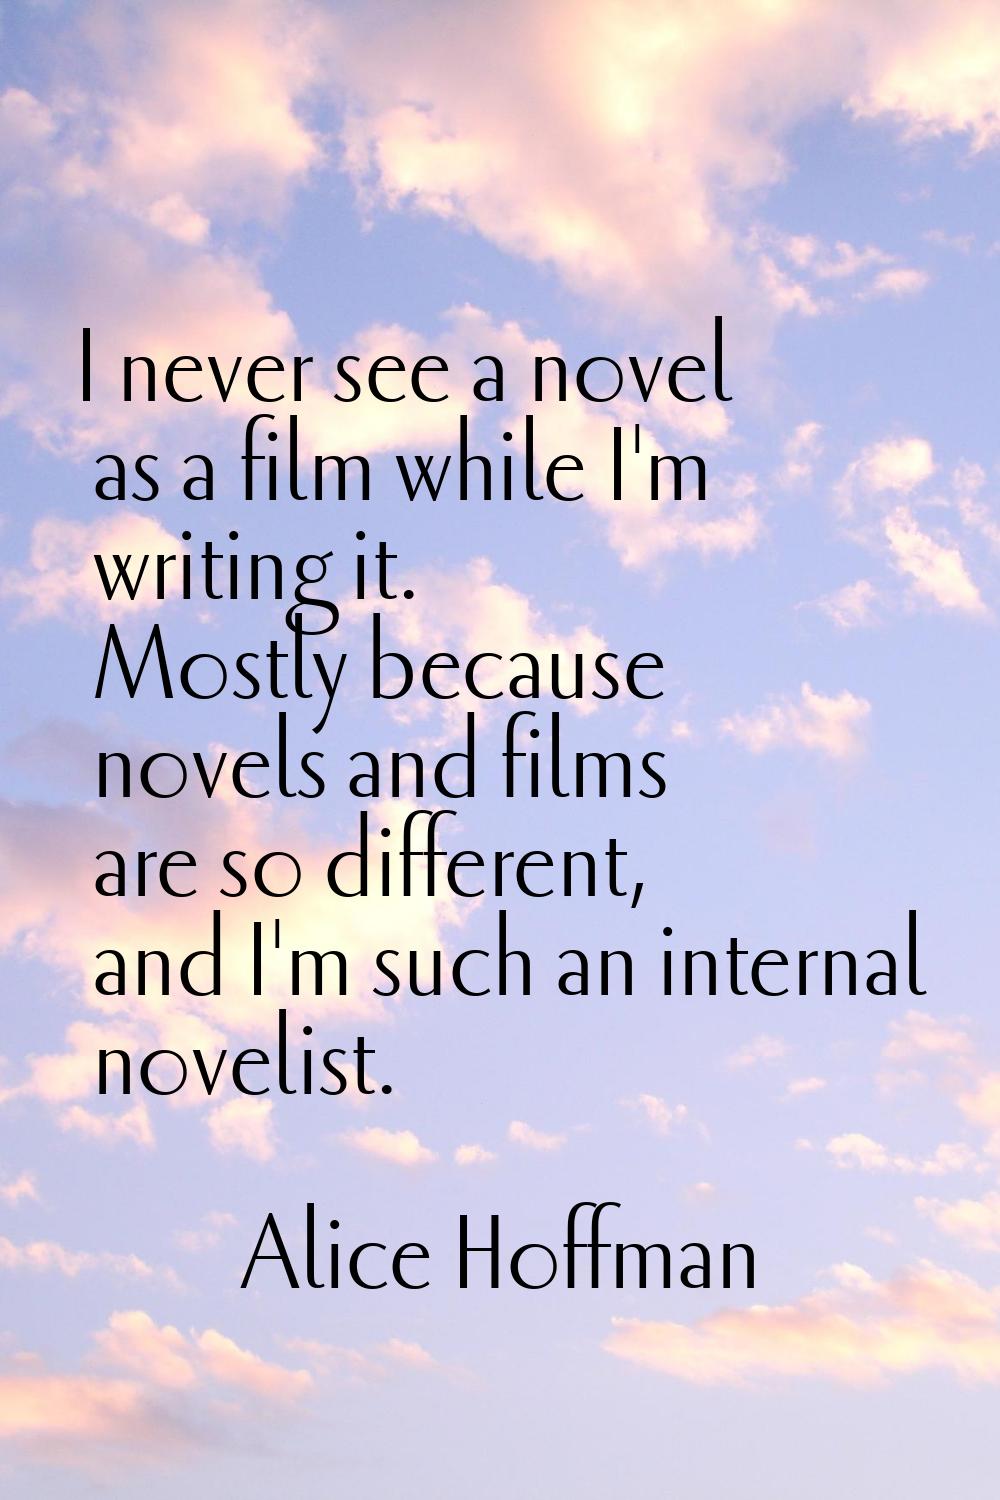 I never see a novel as a film while I'm writing it. Mostly because novels and films are so differen